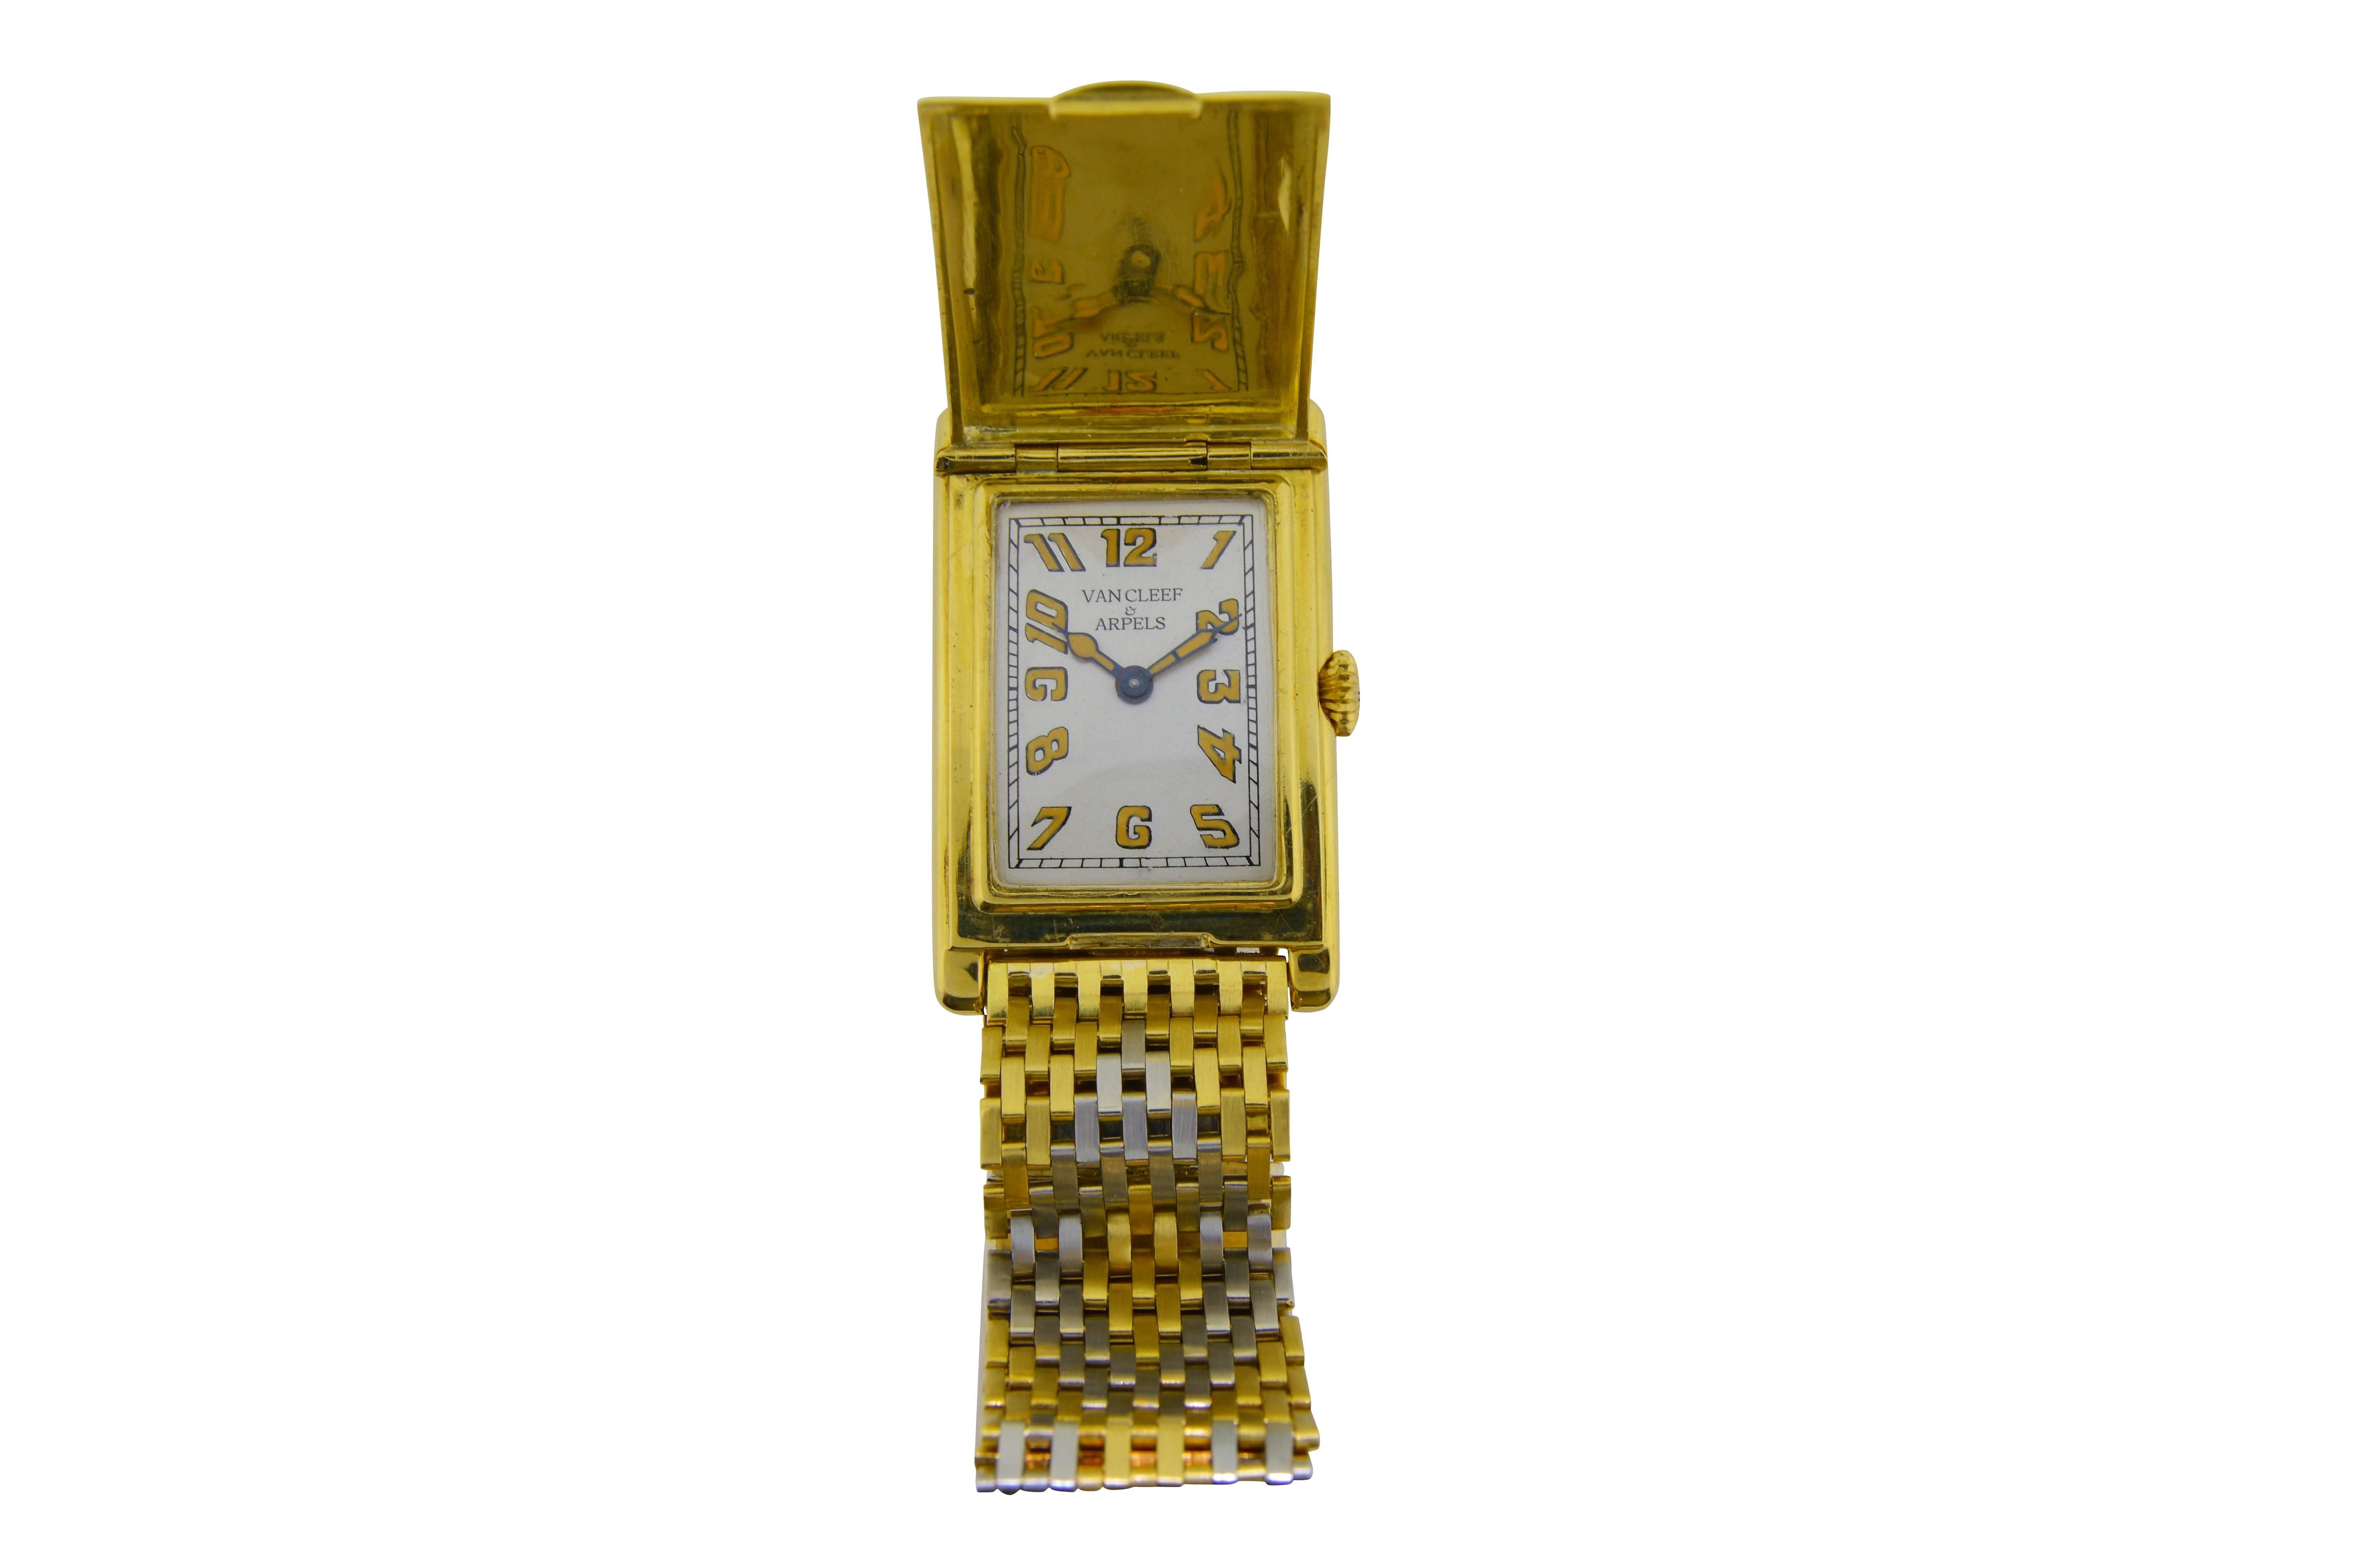 FACTORY / HOUSE: Van Cleef and Arpels 
STYLE / REFERENCE: Covered Dial / Art Deco
METAL / MATERIAL: 18Kt. Yellow Gold / Yellow and White Gold Bracelet
DIMENSIONS: Length 41mm  X Width 25mm
CIRCA: 1930's
MOVEMENT / CALIBER: 17 Jewel / Swiss Hand Made